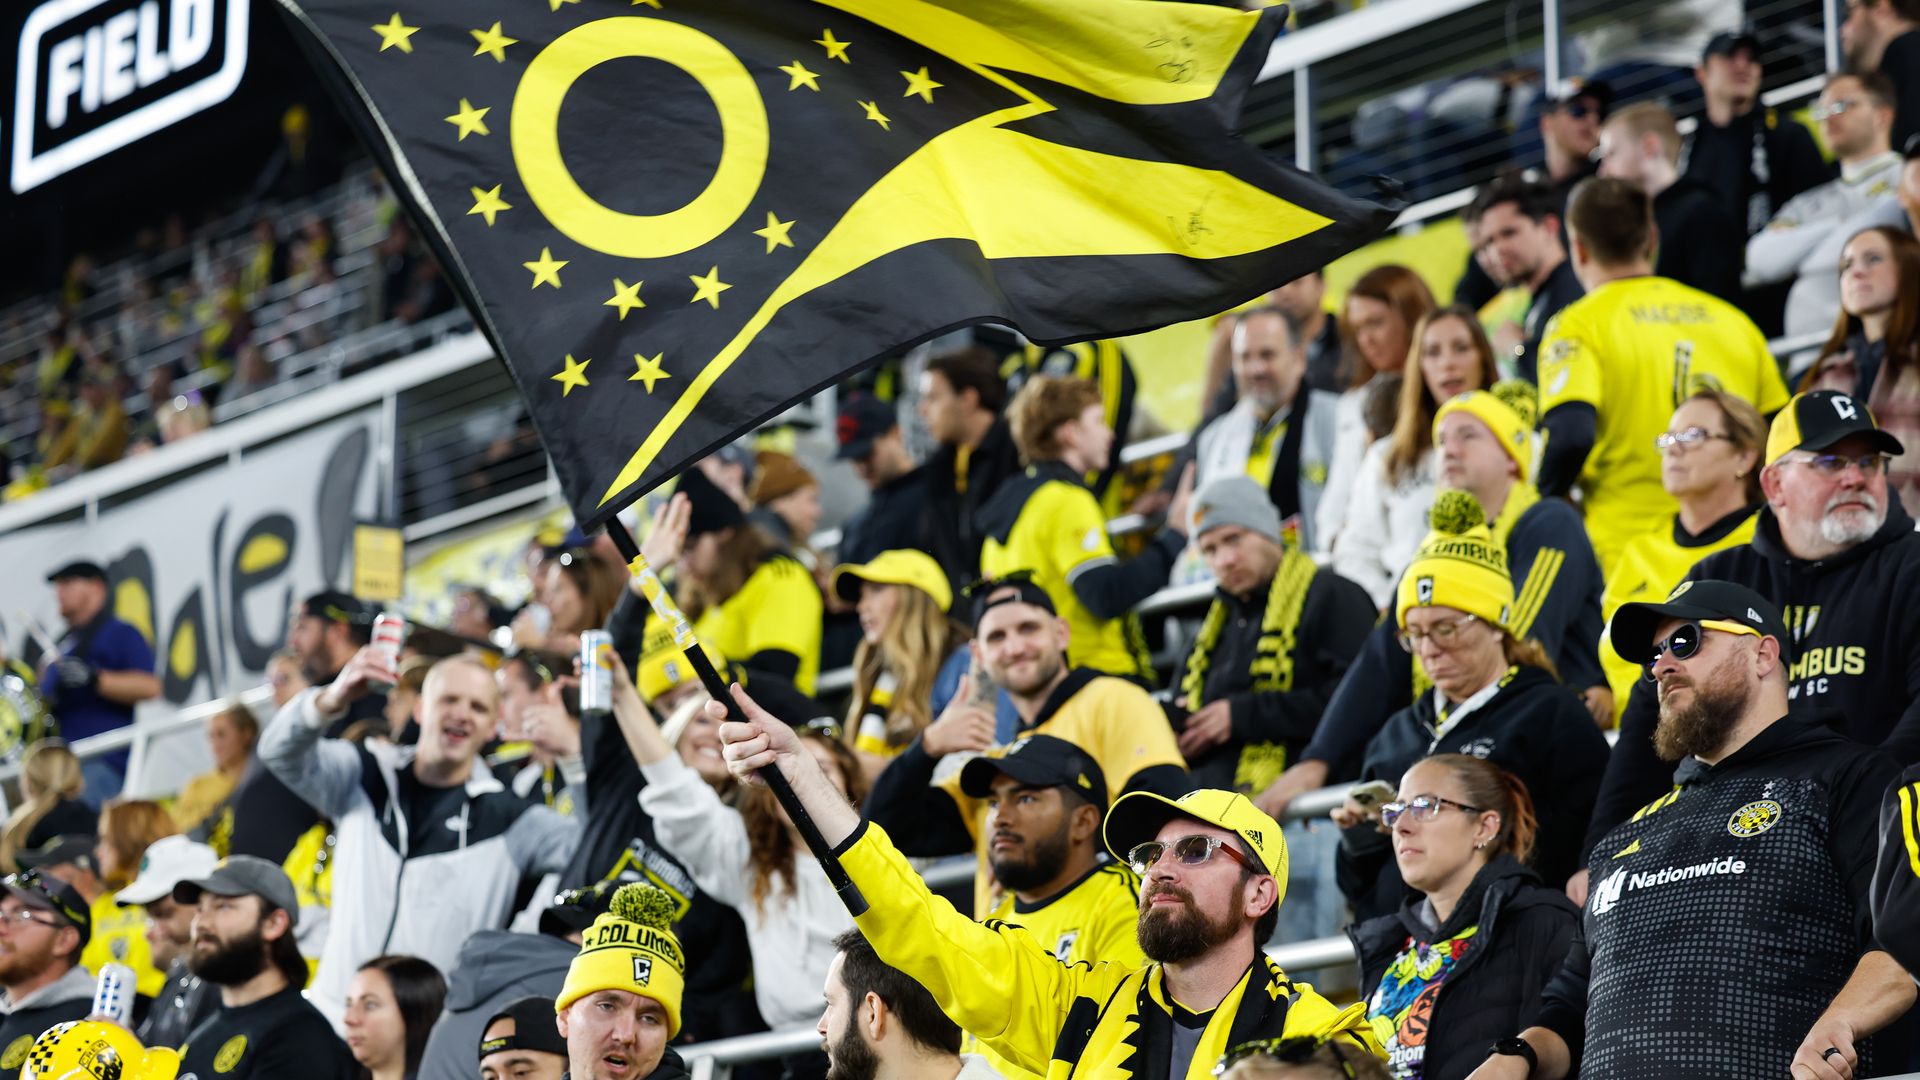 A Crew fan holds a black and gold Ohio state flag in the Lower.com Field stands